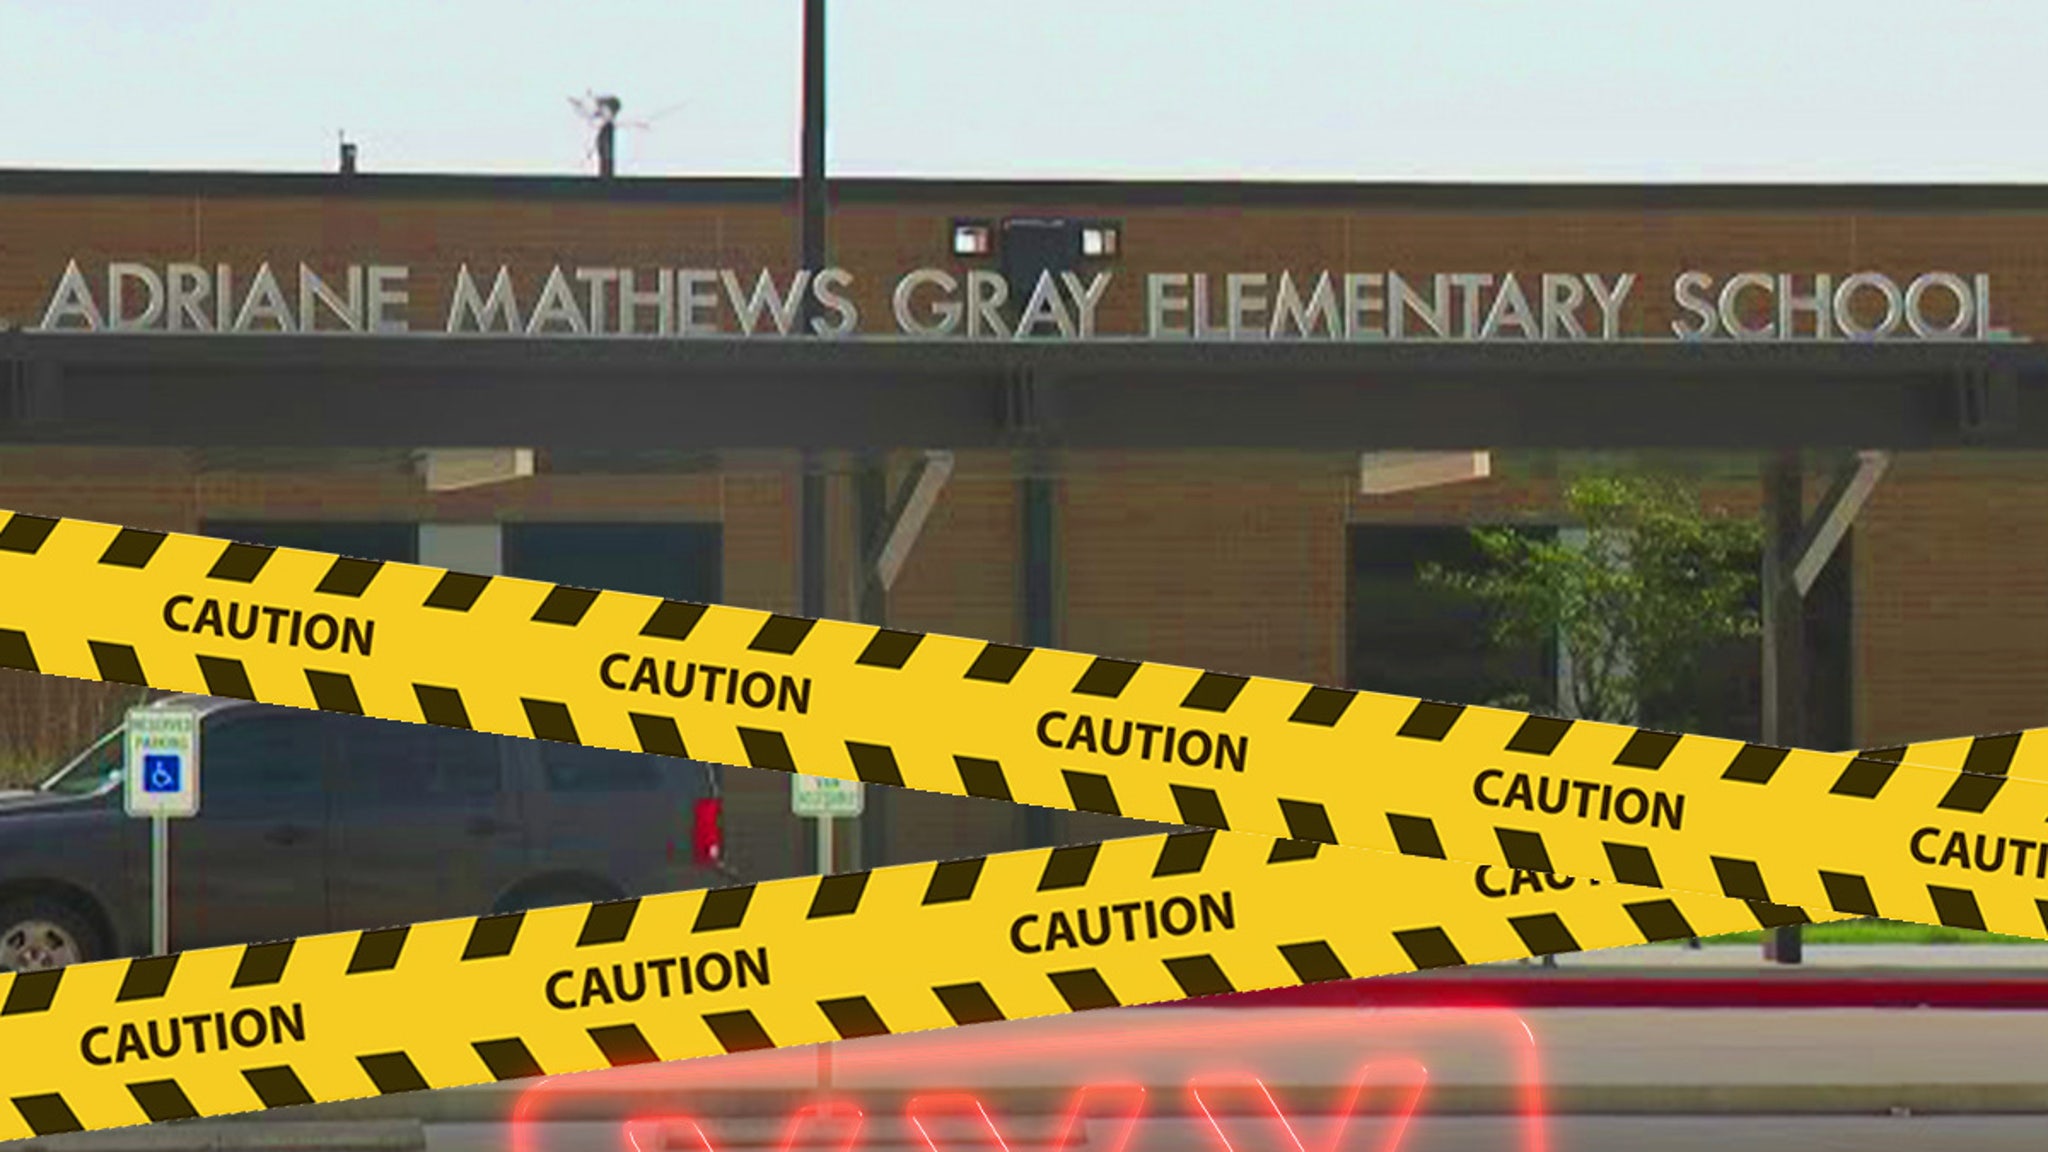 Texas Elementary School Hit With Two Ugly Scandals, Murder And Revenge Porn